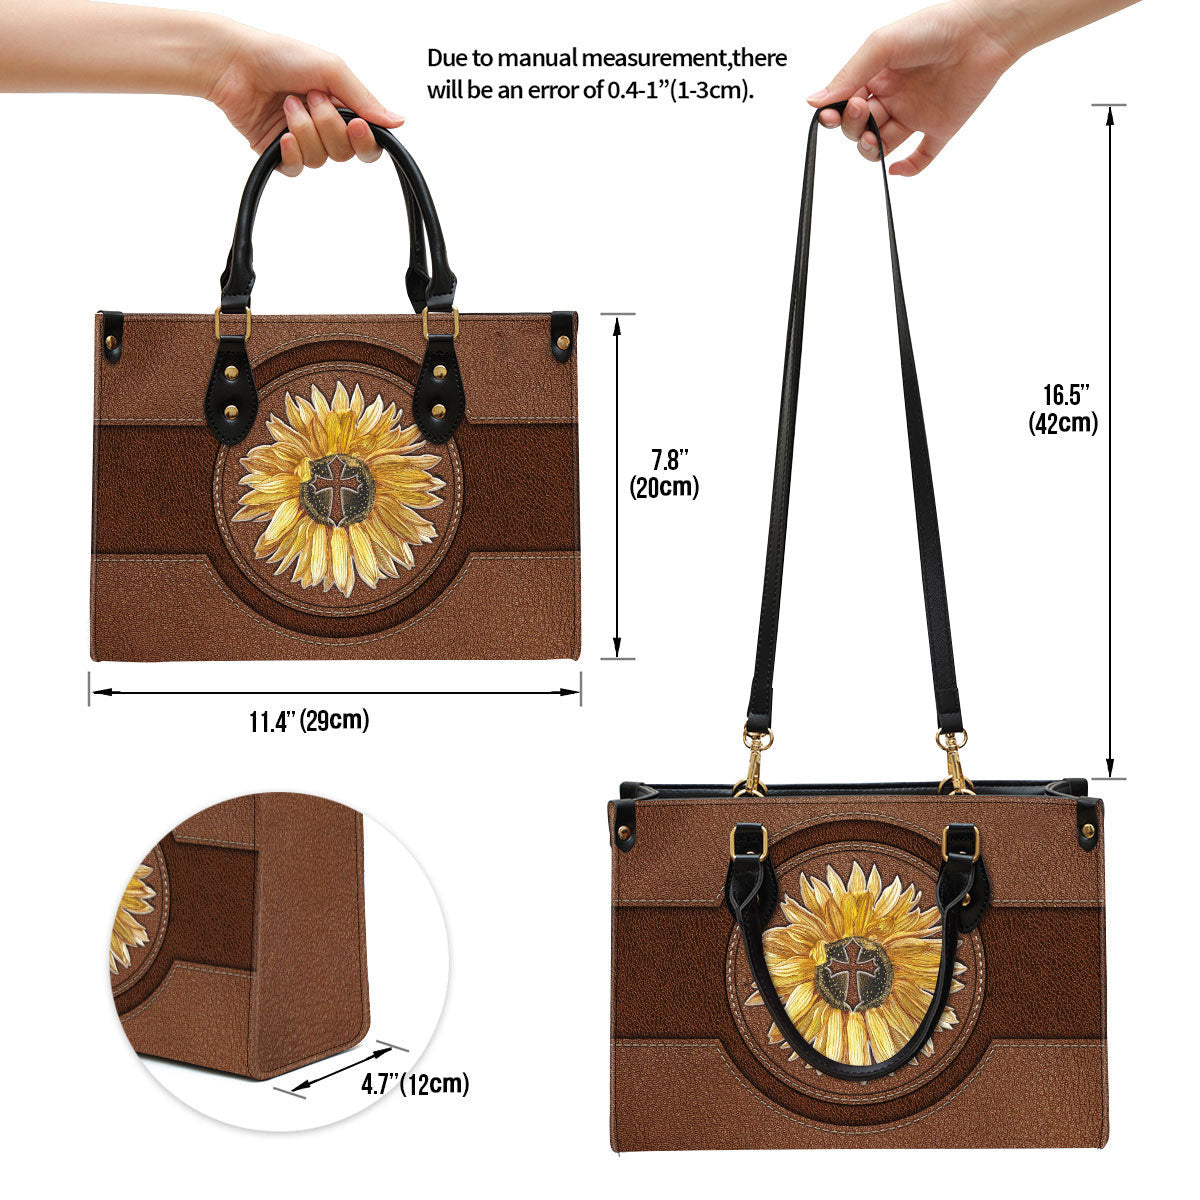 Sunflower Leather Handbag, Religious Gifts For Women, Women Pu Leather Bag